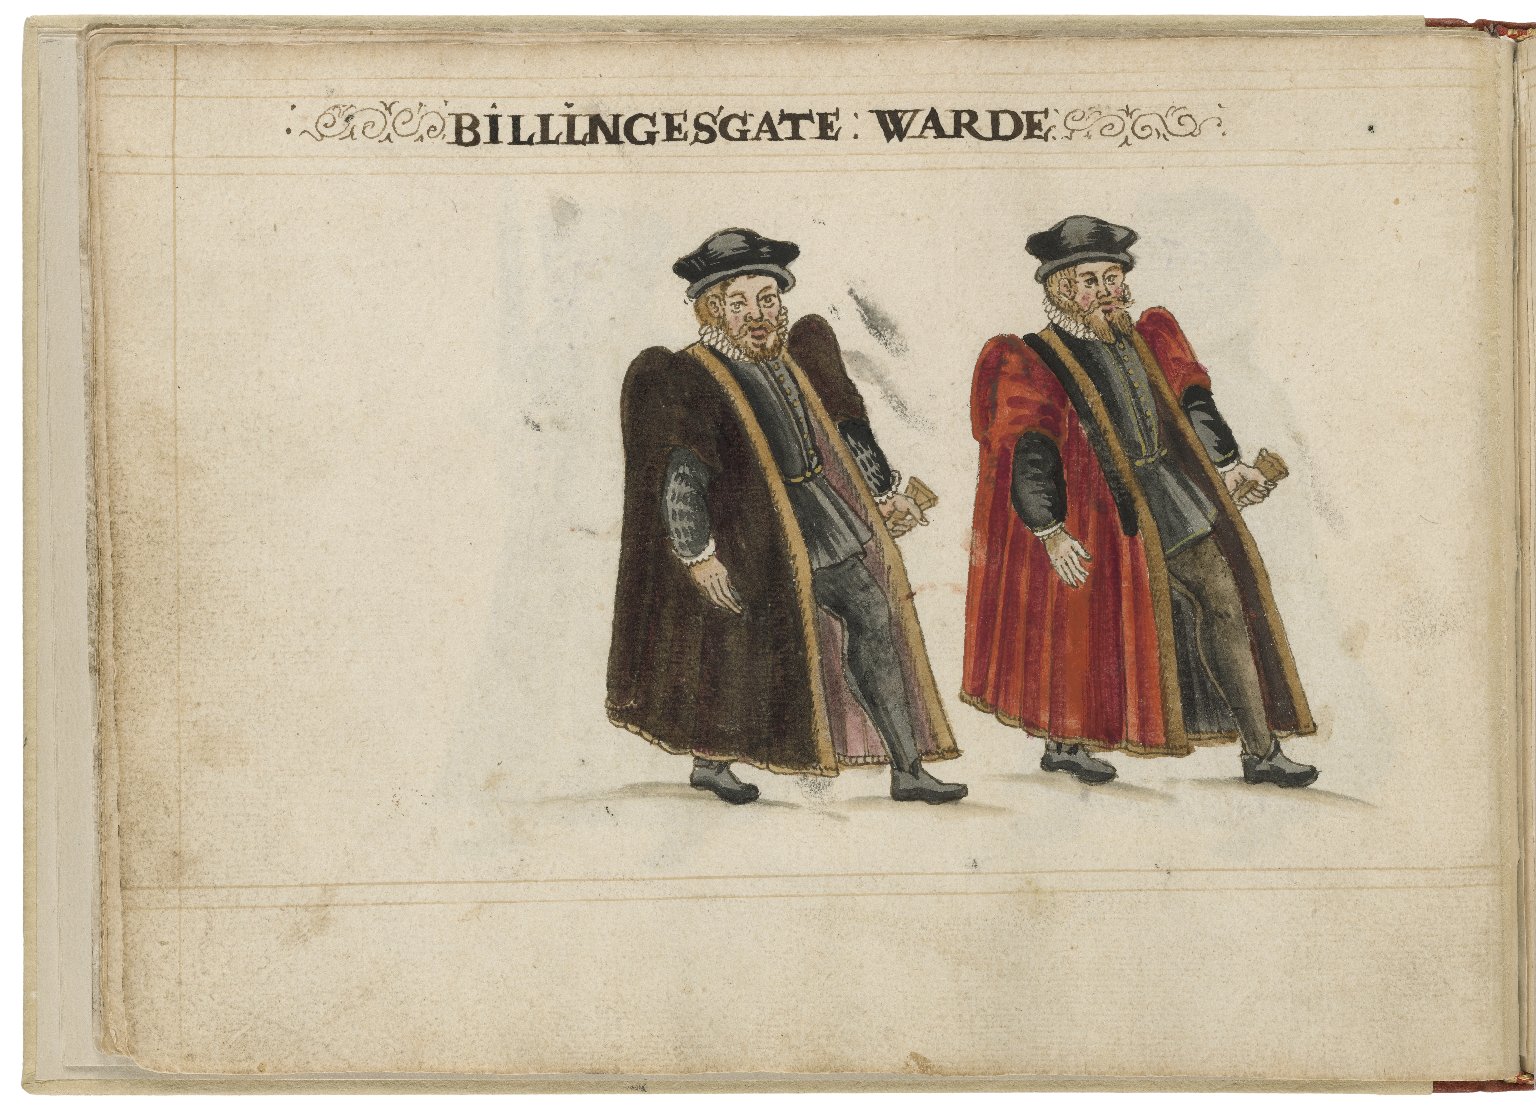 Watercolour painting of the alderman and deputy in charge of Billingsgate Ward by Hugh Alley. Image courtesy of the Folger Digital Image Collection.